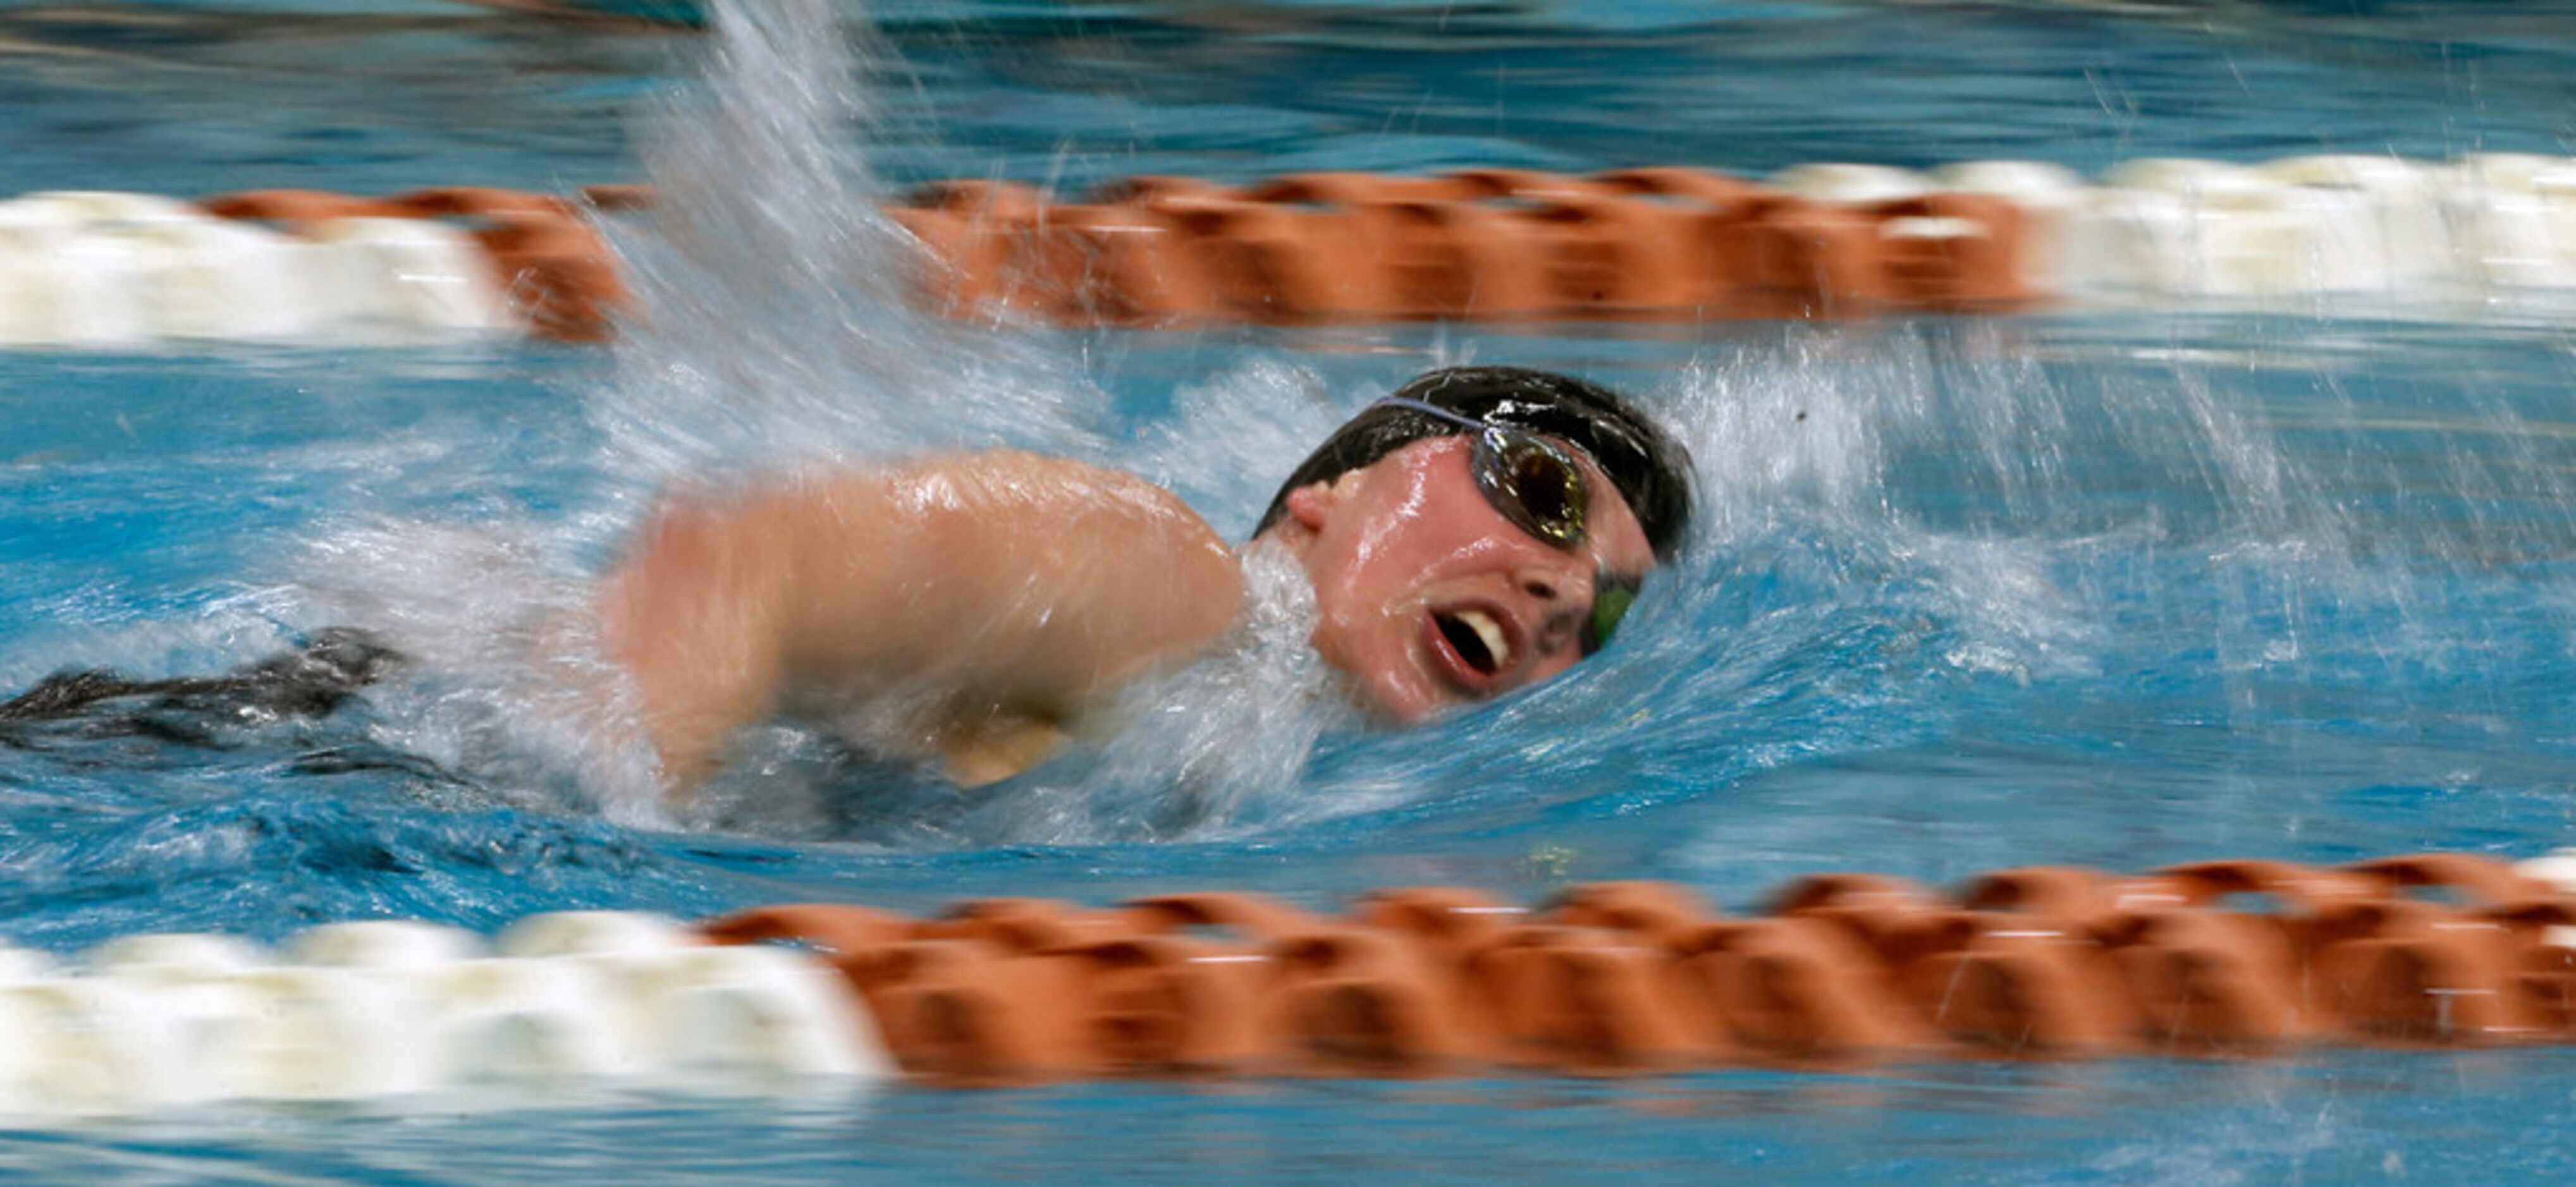 Class 5A preliminaries of the UIL state swimming and diving meet were held in Austin, Texas...